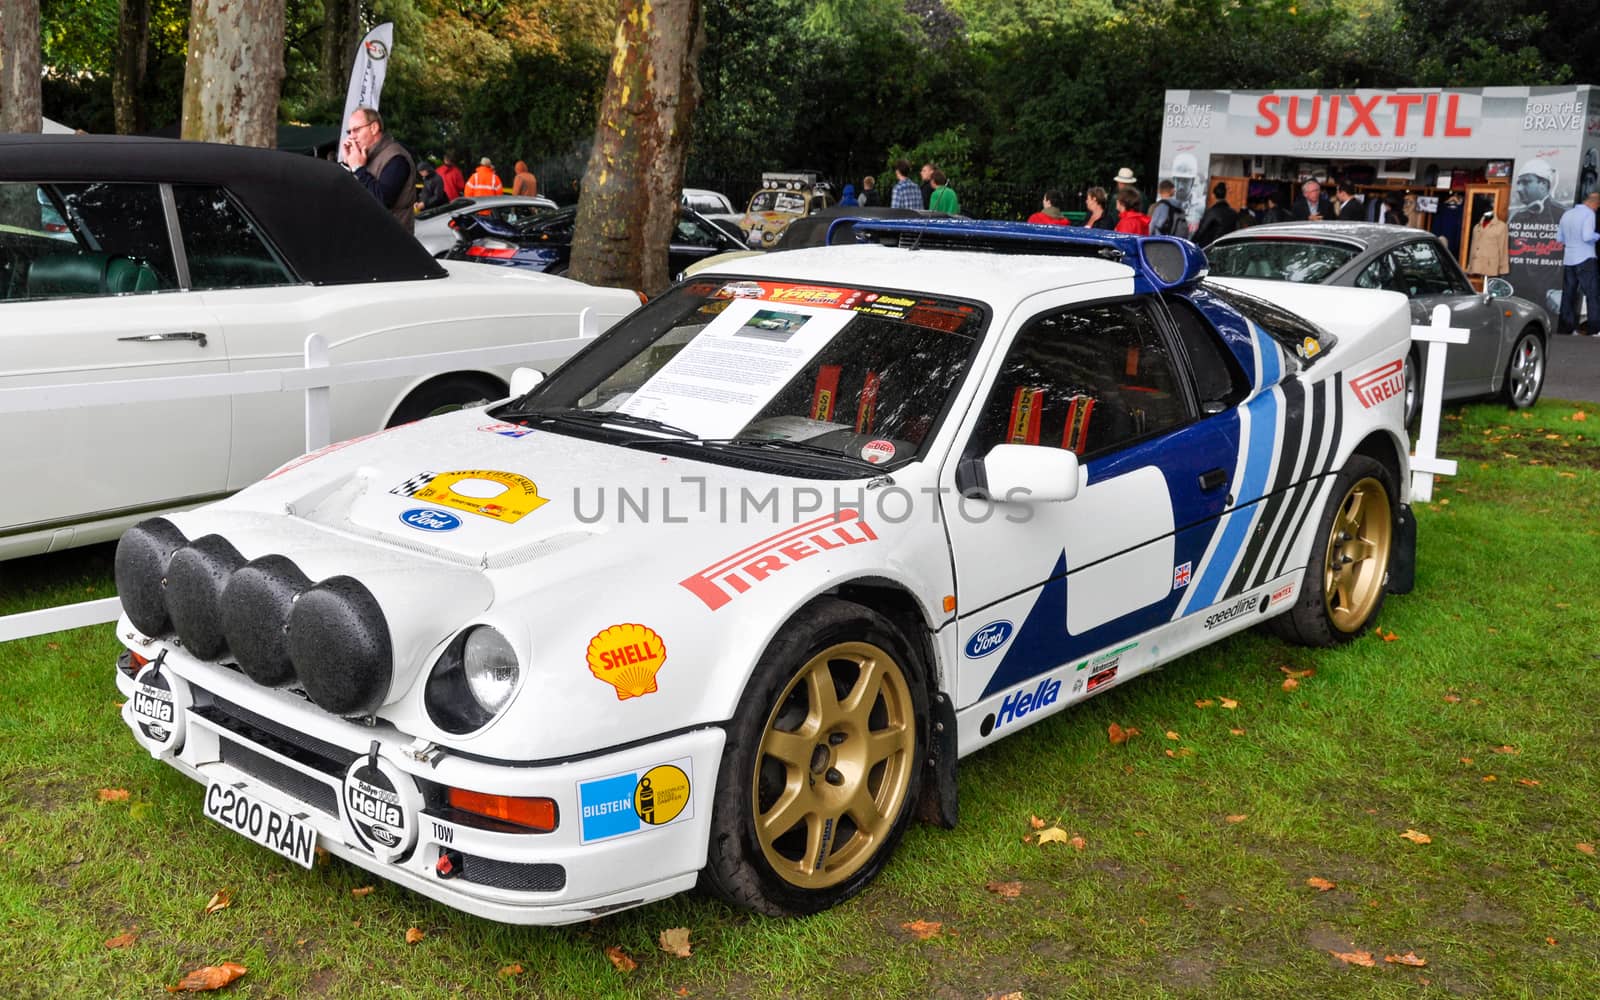 LONDON, UK - CIRCA SEPTEMBER 2011: A Ford RS200 at Chelsea Autolegends. The Ford RS200 was a Group B rally car.